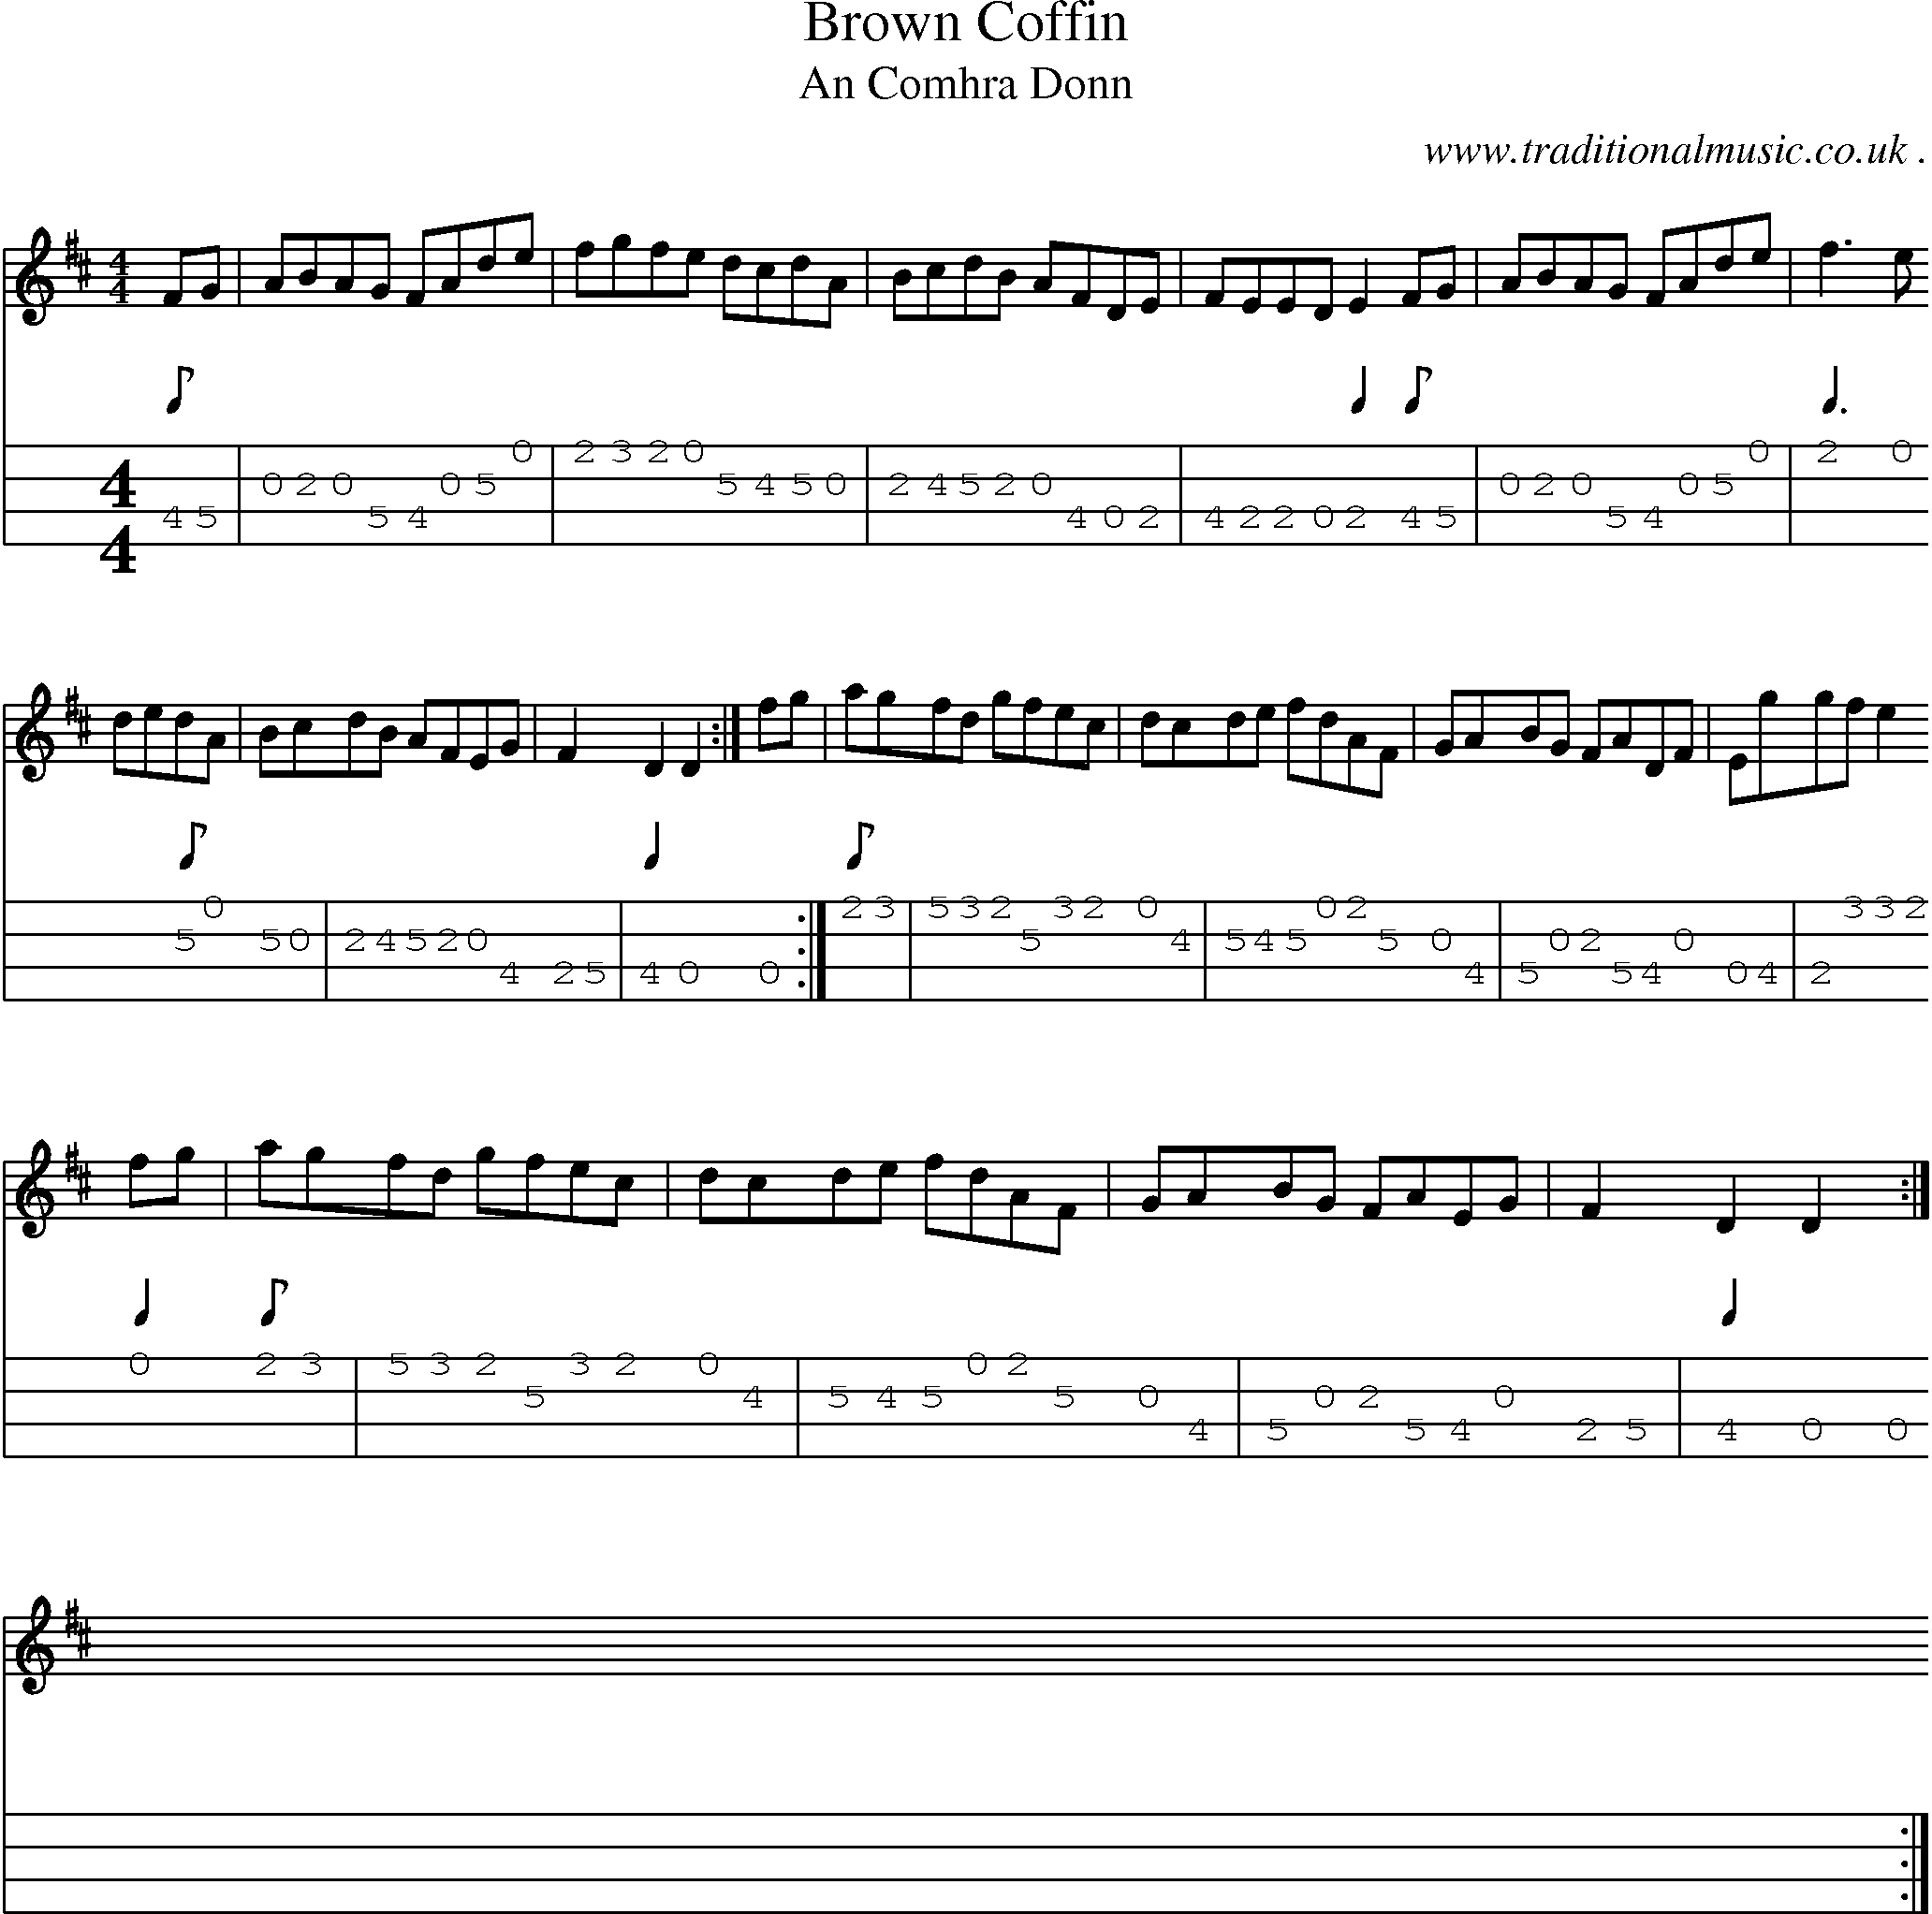 Sheet-Music and Mandolin Tabs for Brown Coffin